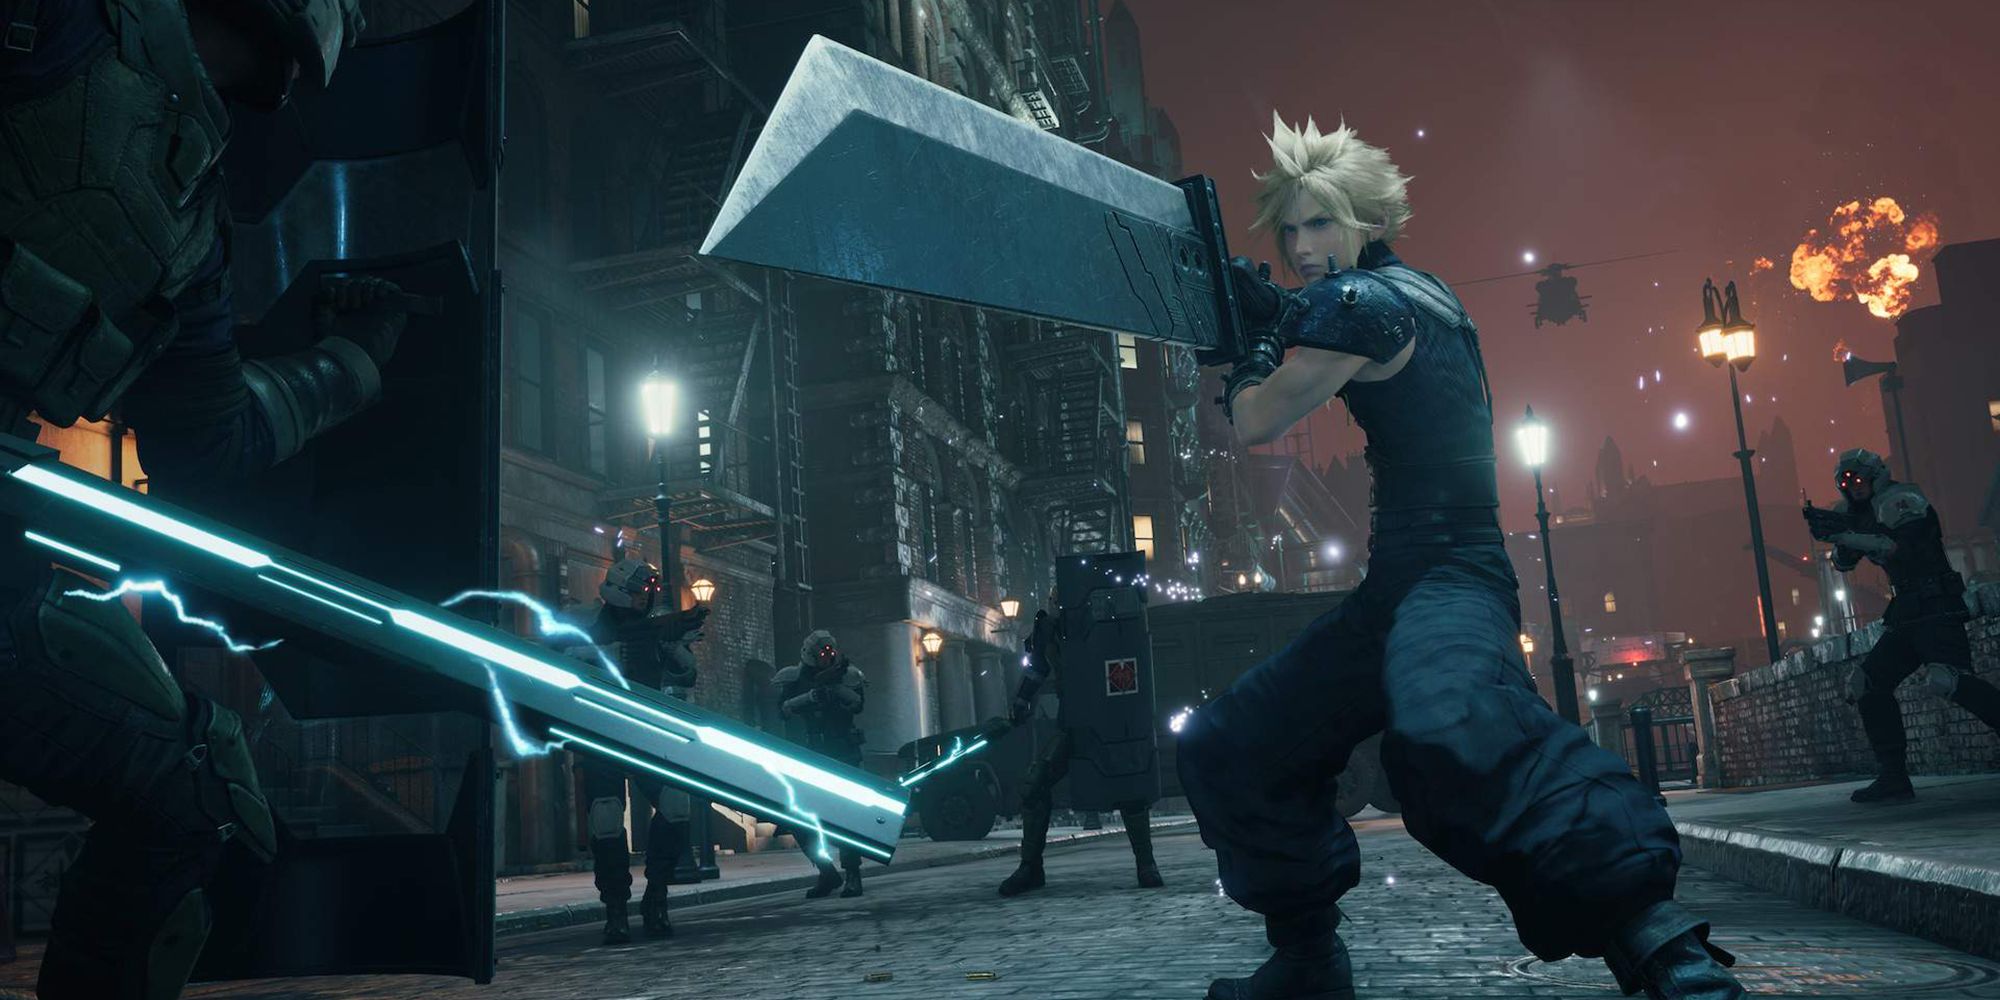 An image from Final Fantasy VII